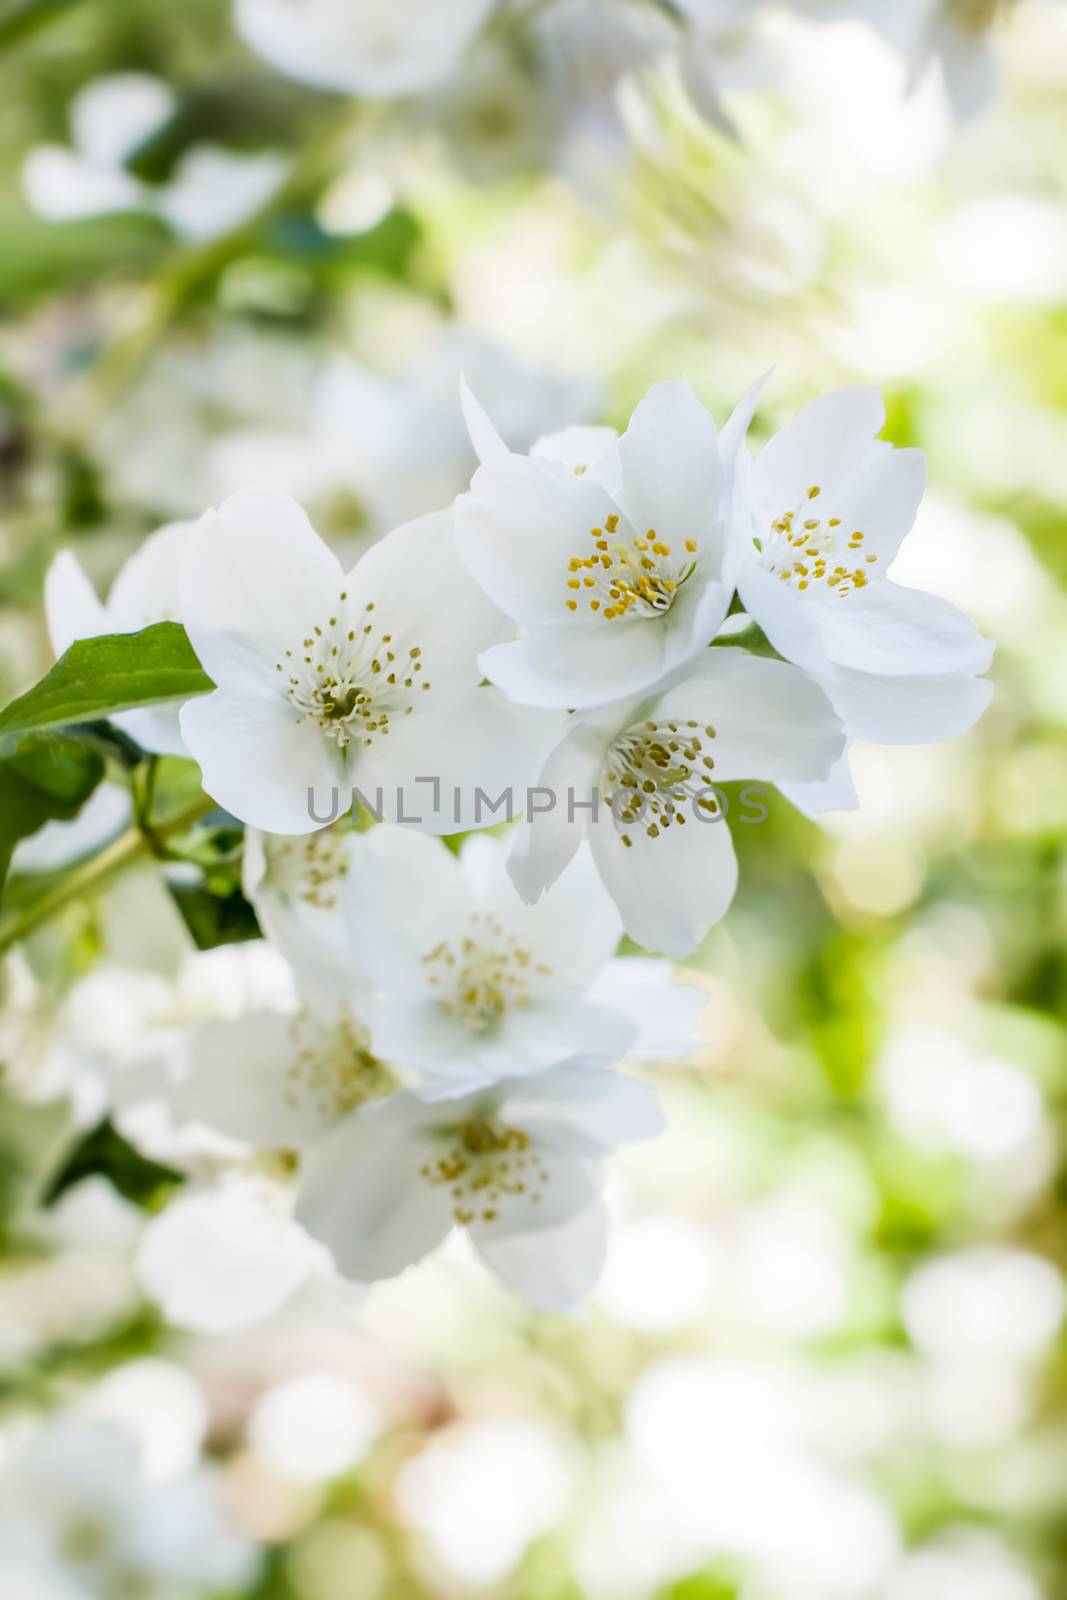 White jasmine flowers on shrub in june by Angel_a